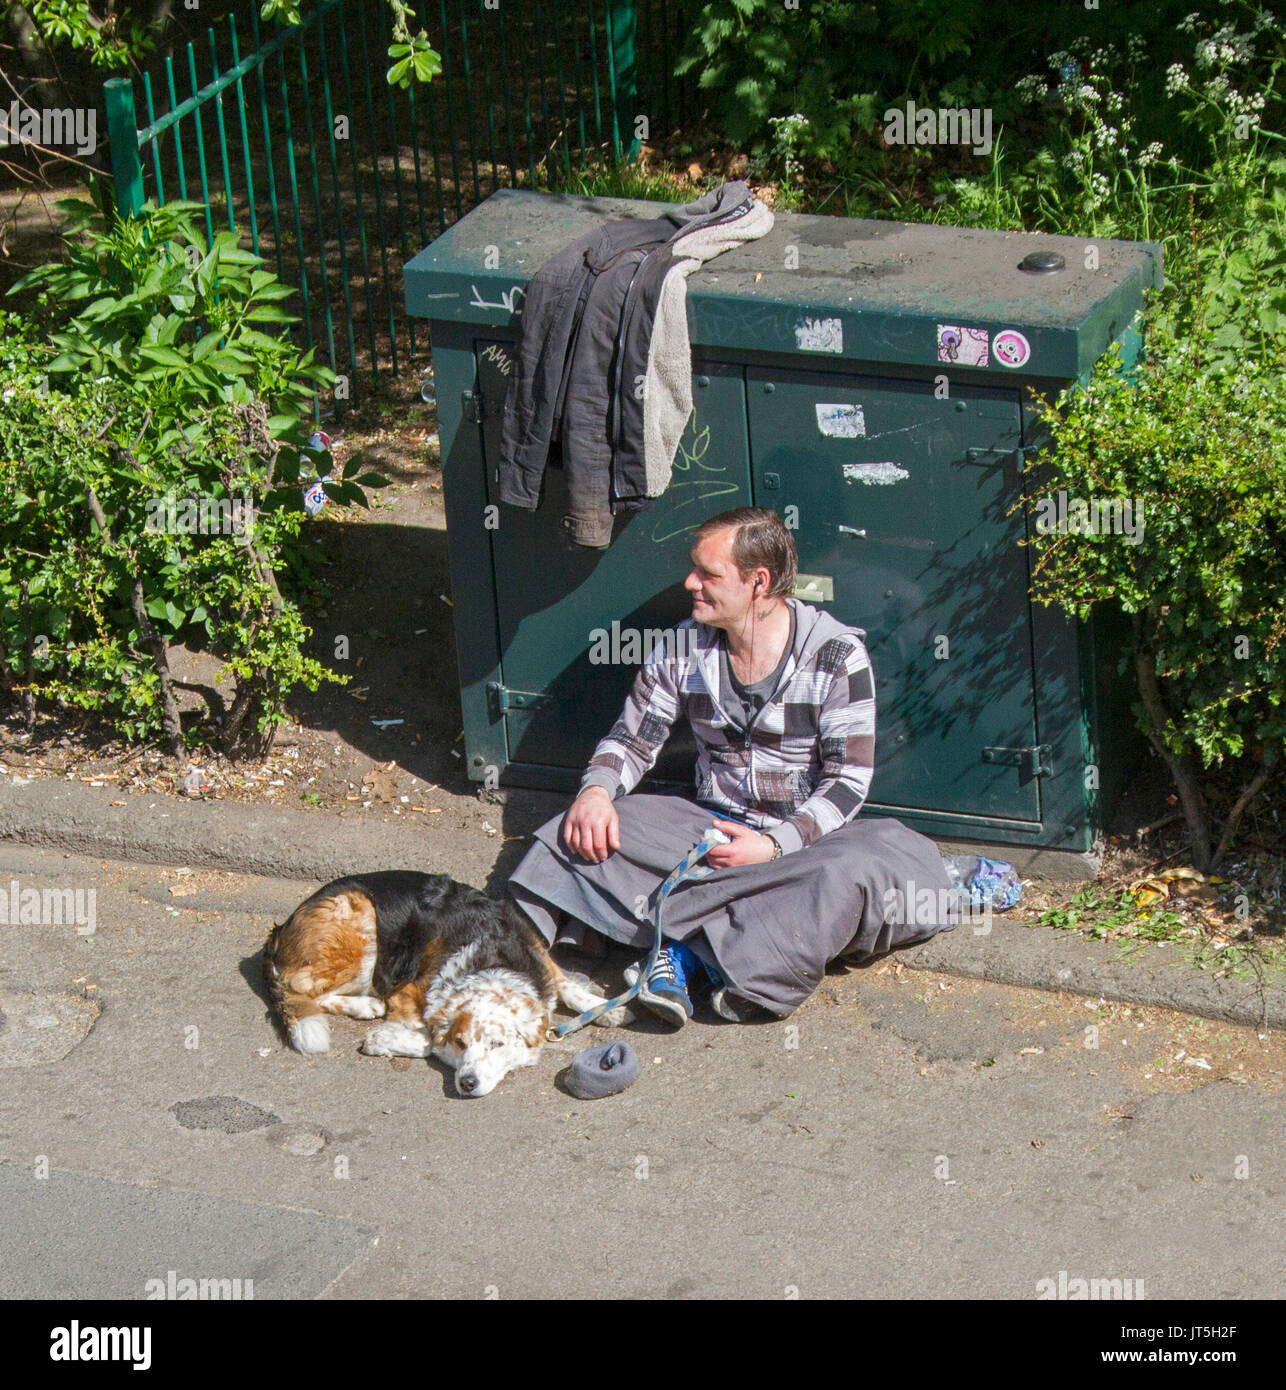 Homeless man sitting on pavement with sleeping dog in York, England Stock Photo